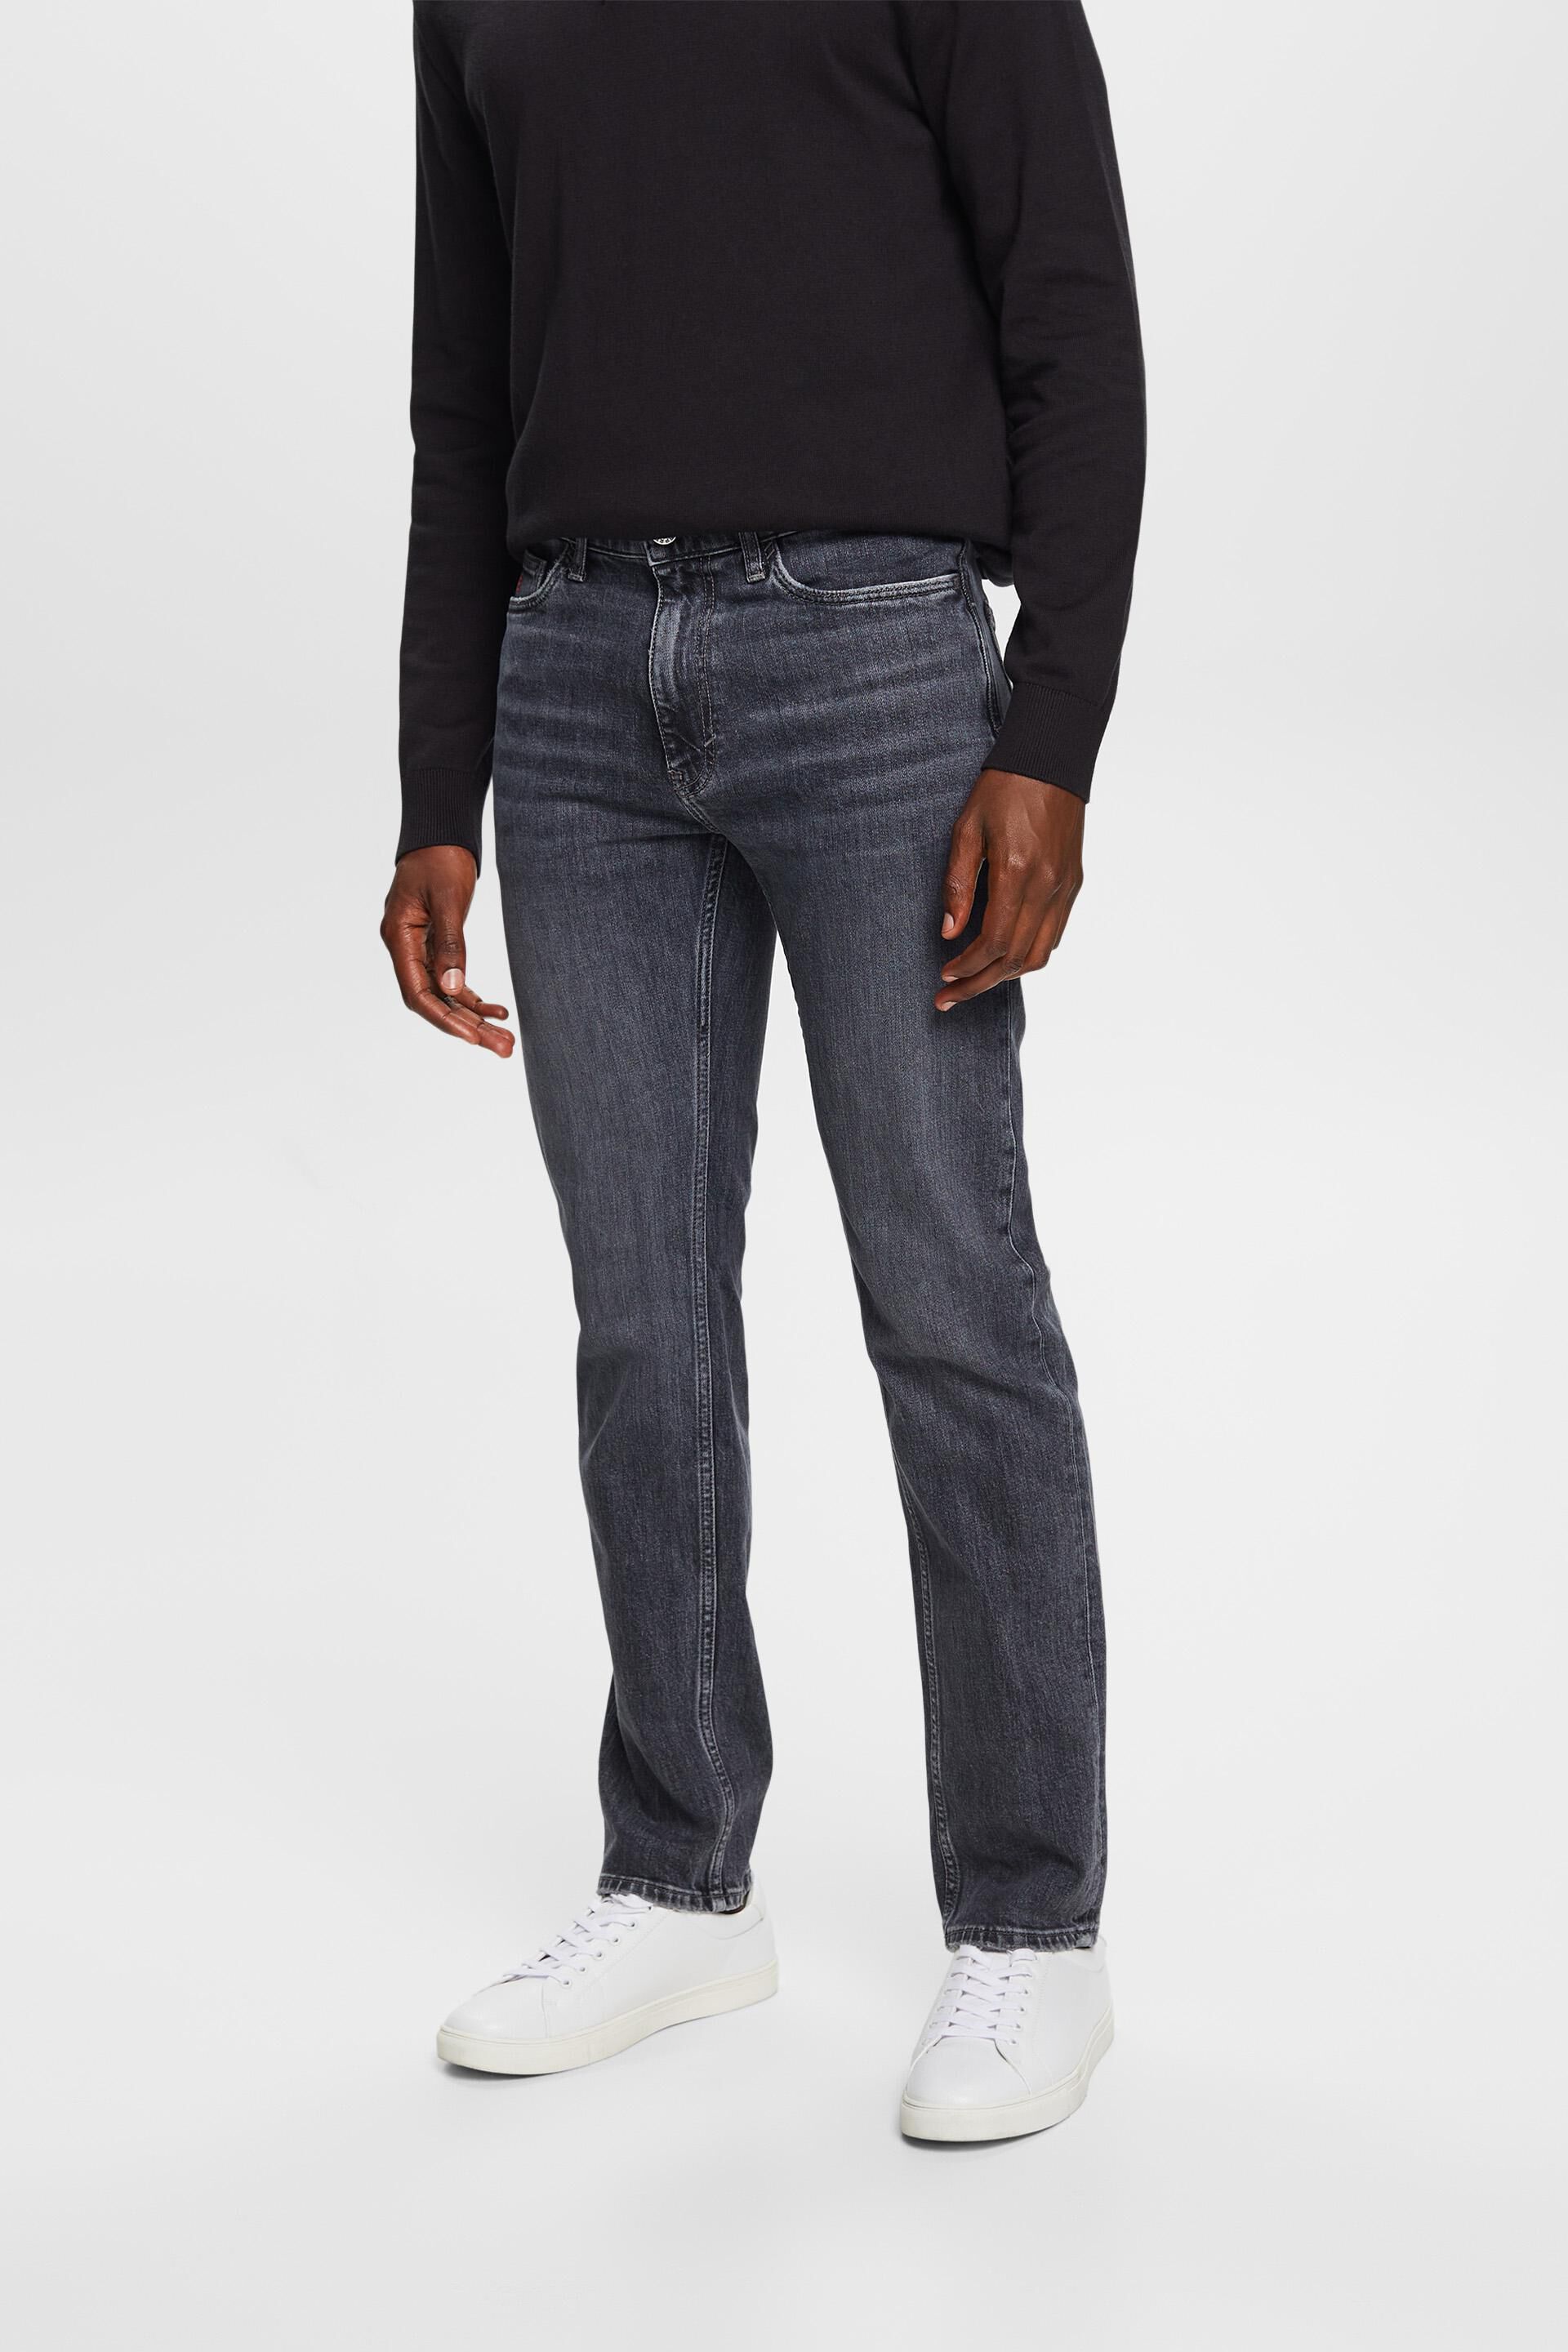 Esprit Jeans Straight-Leg Relaxed